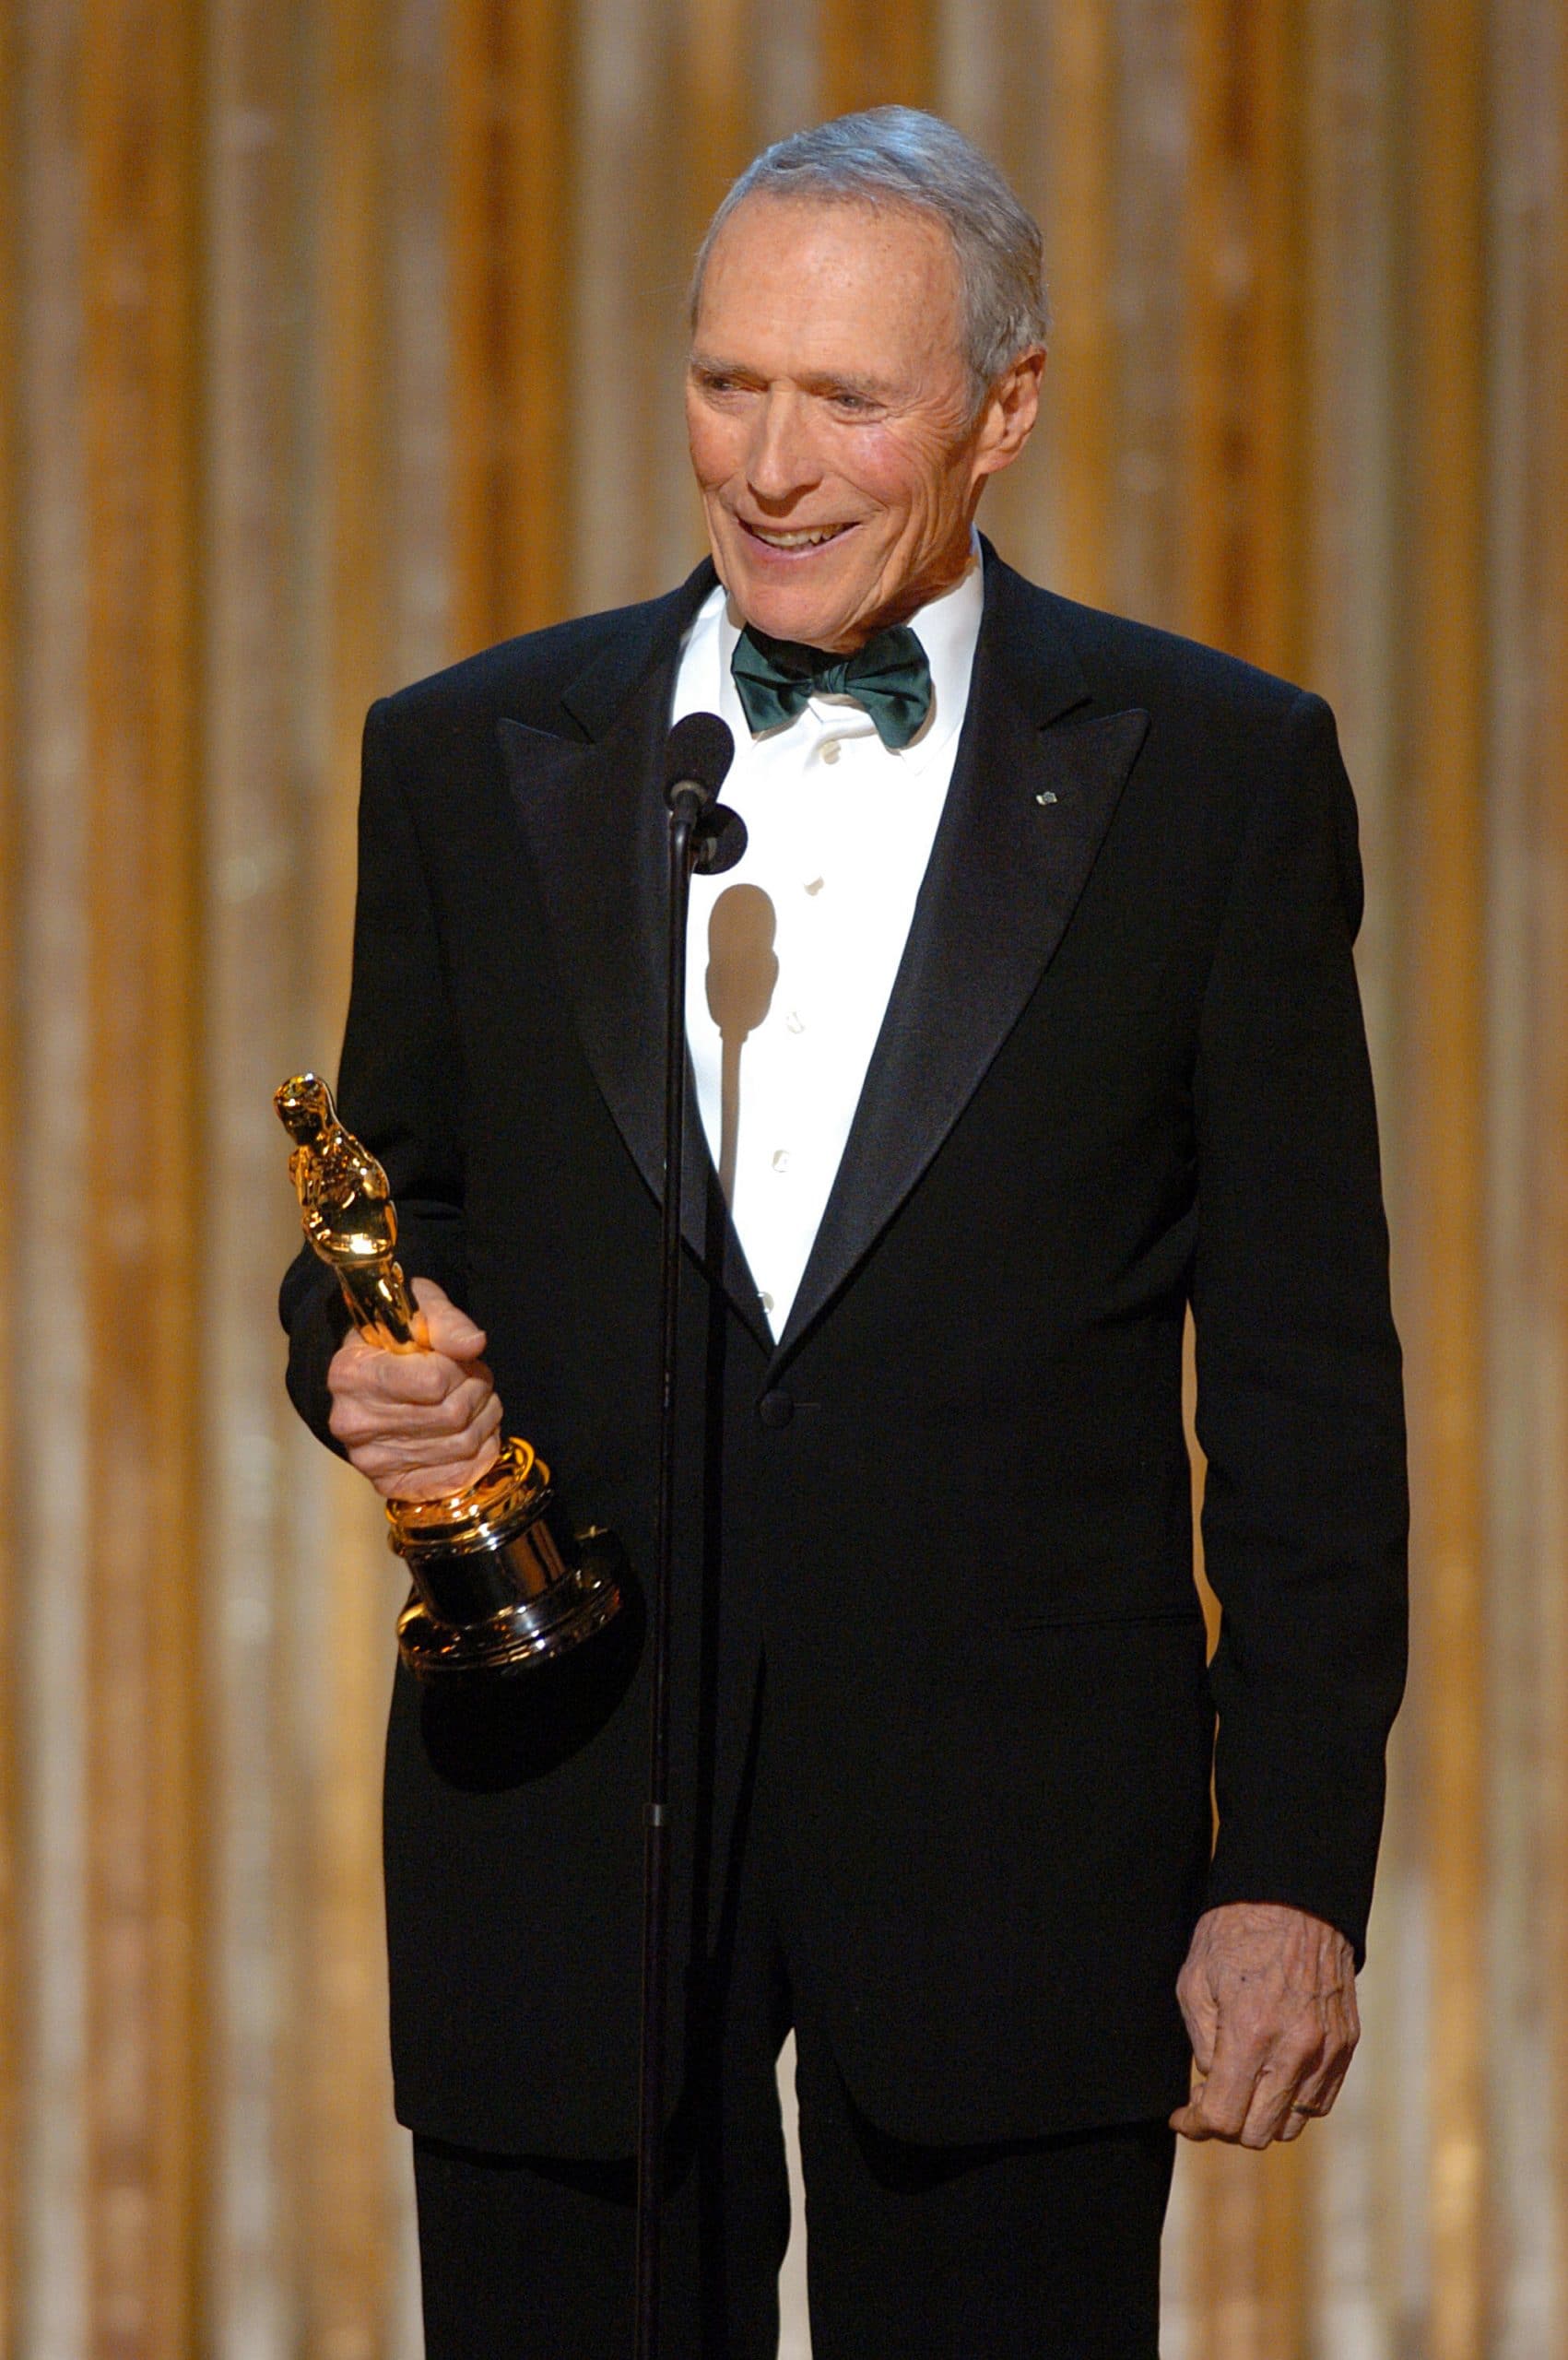 Clint Eastwood on stage at the 77th Annual Academy Awards, Los Angeles, CA, February 27, 2005